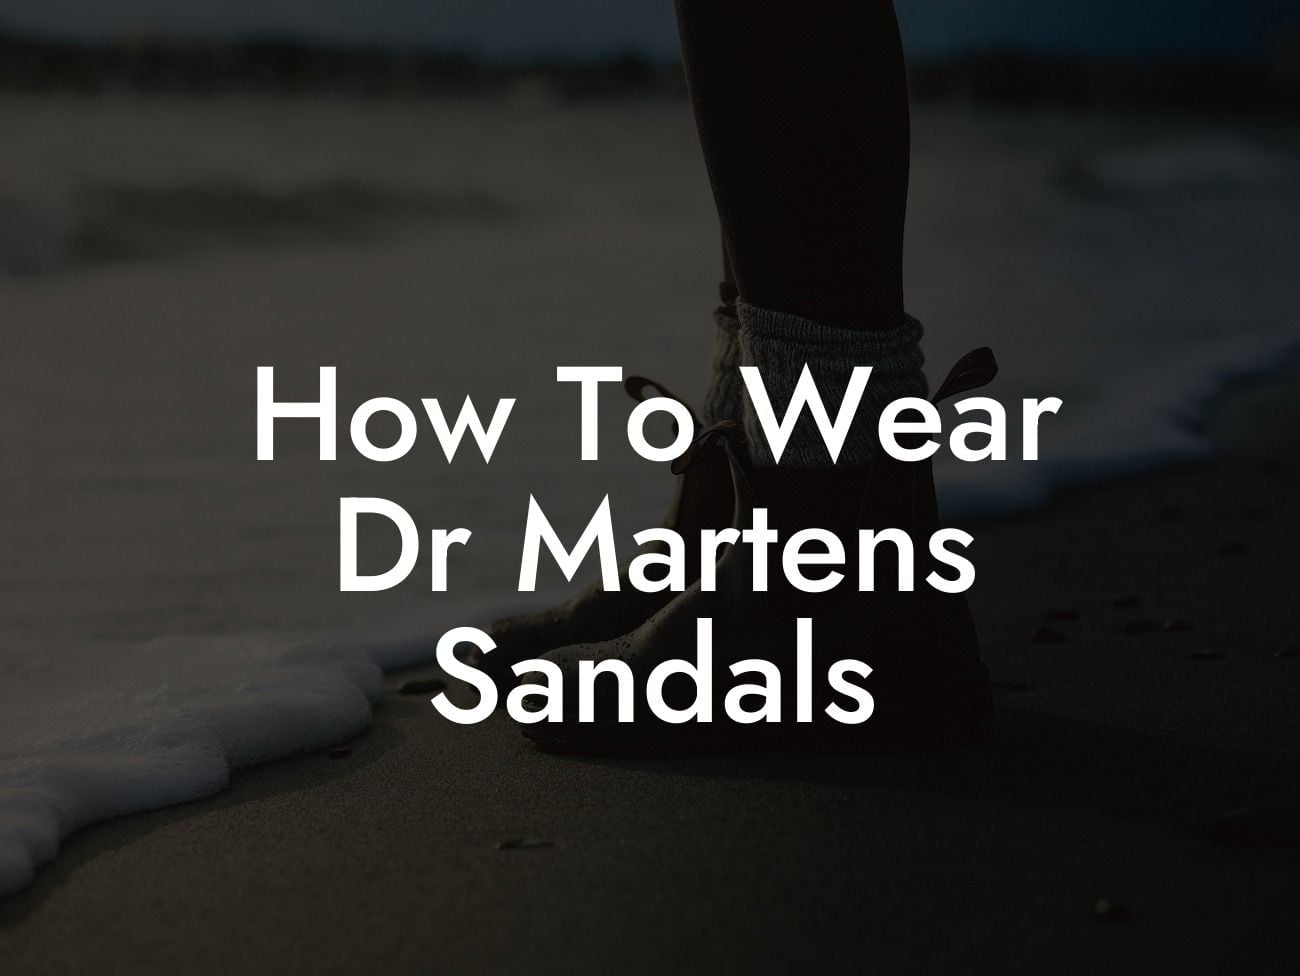 How To Wear Dr Martens Sandals